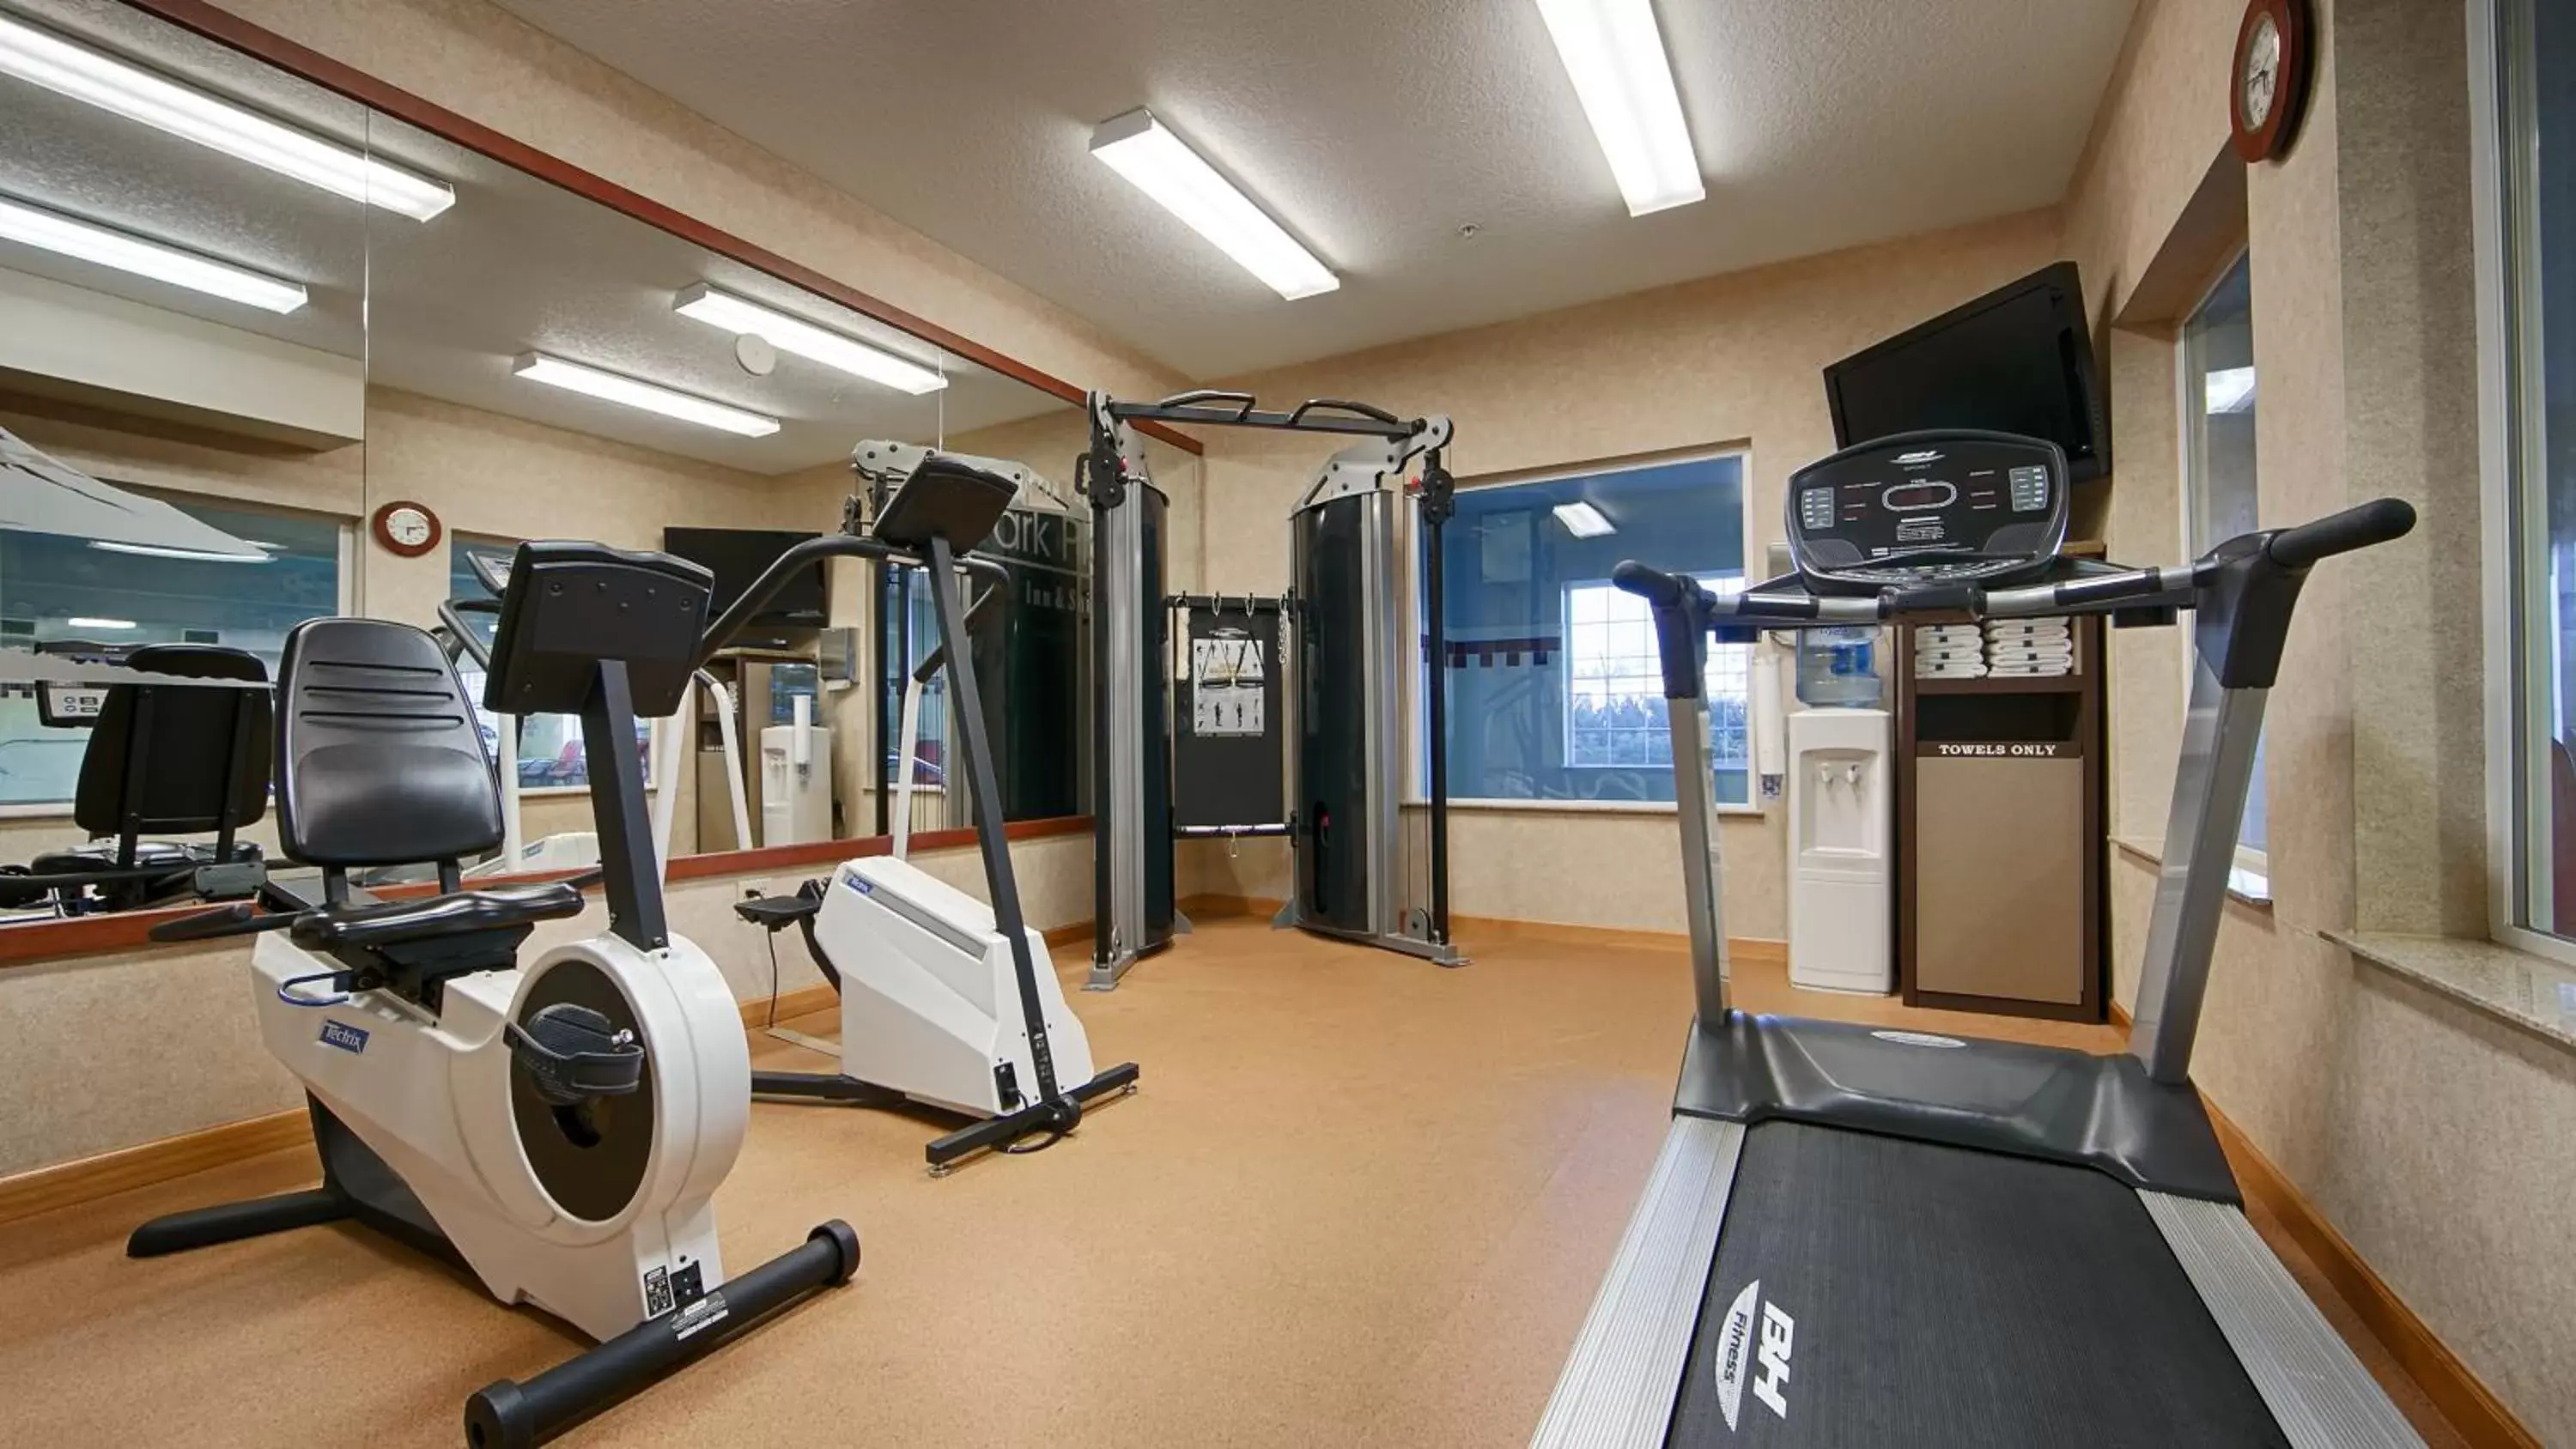 Fitness centre/facilities, Fitness Center/Facilities in Best Western Plus Park Place Inn & Suites